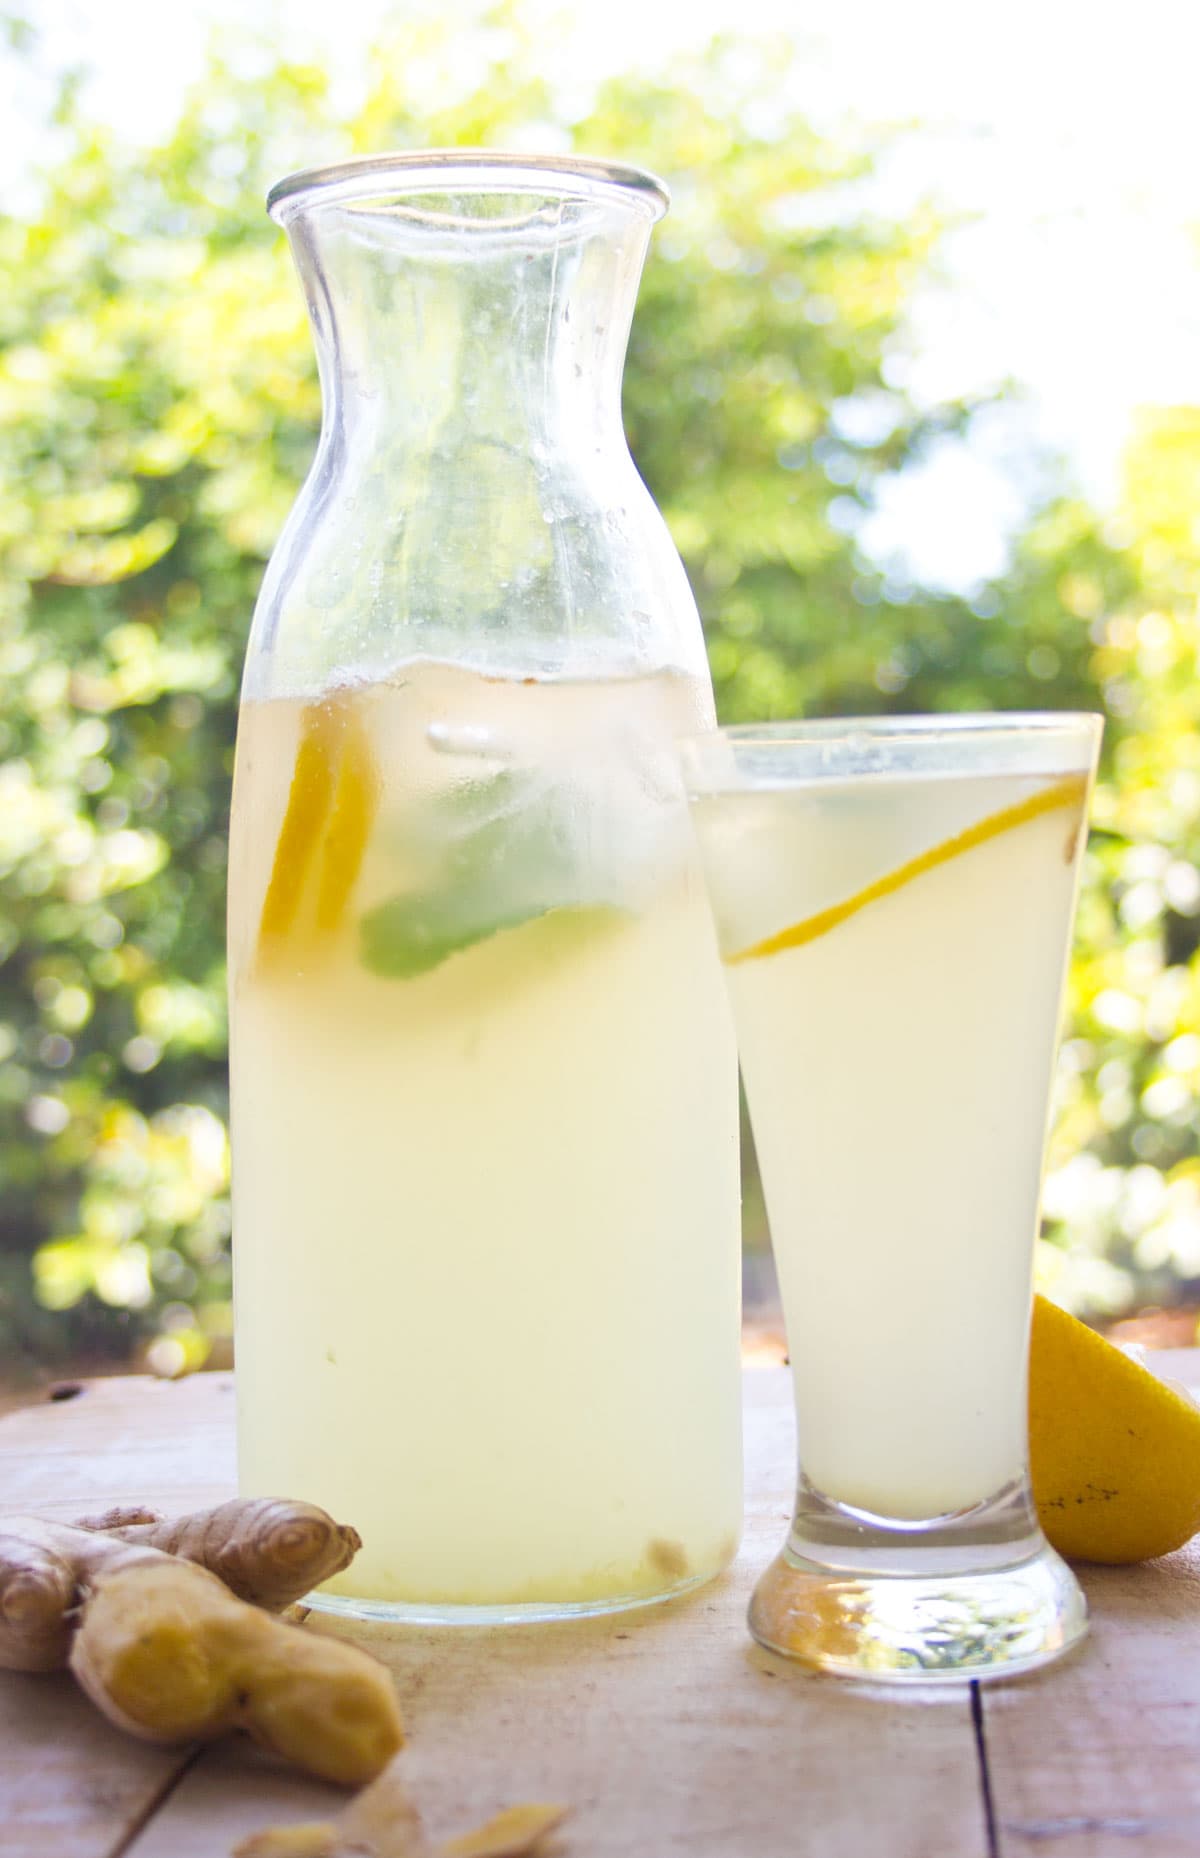 A jug with sugar free ginger ale and a filled glass surrounded by half a lemon and a ginger root.